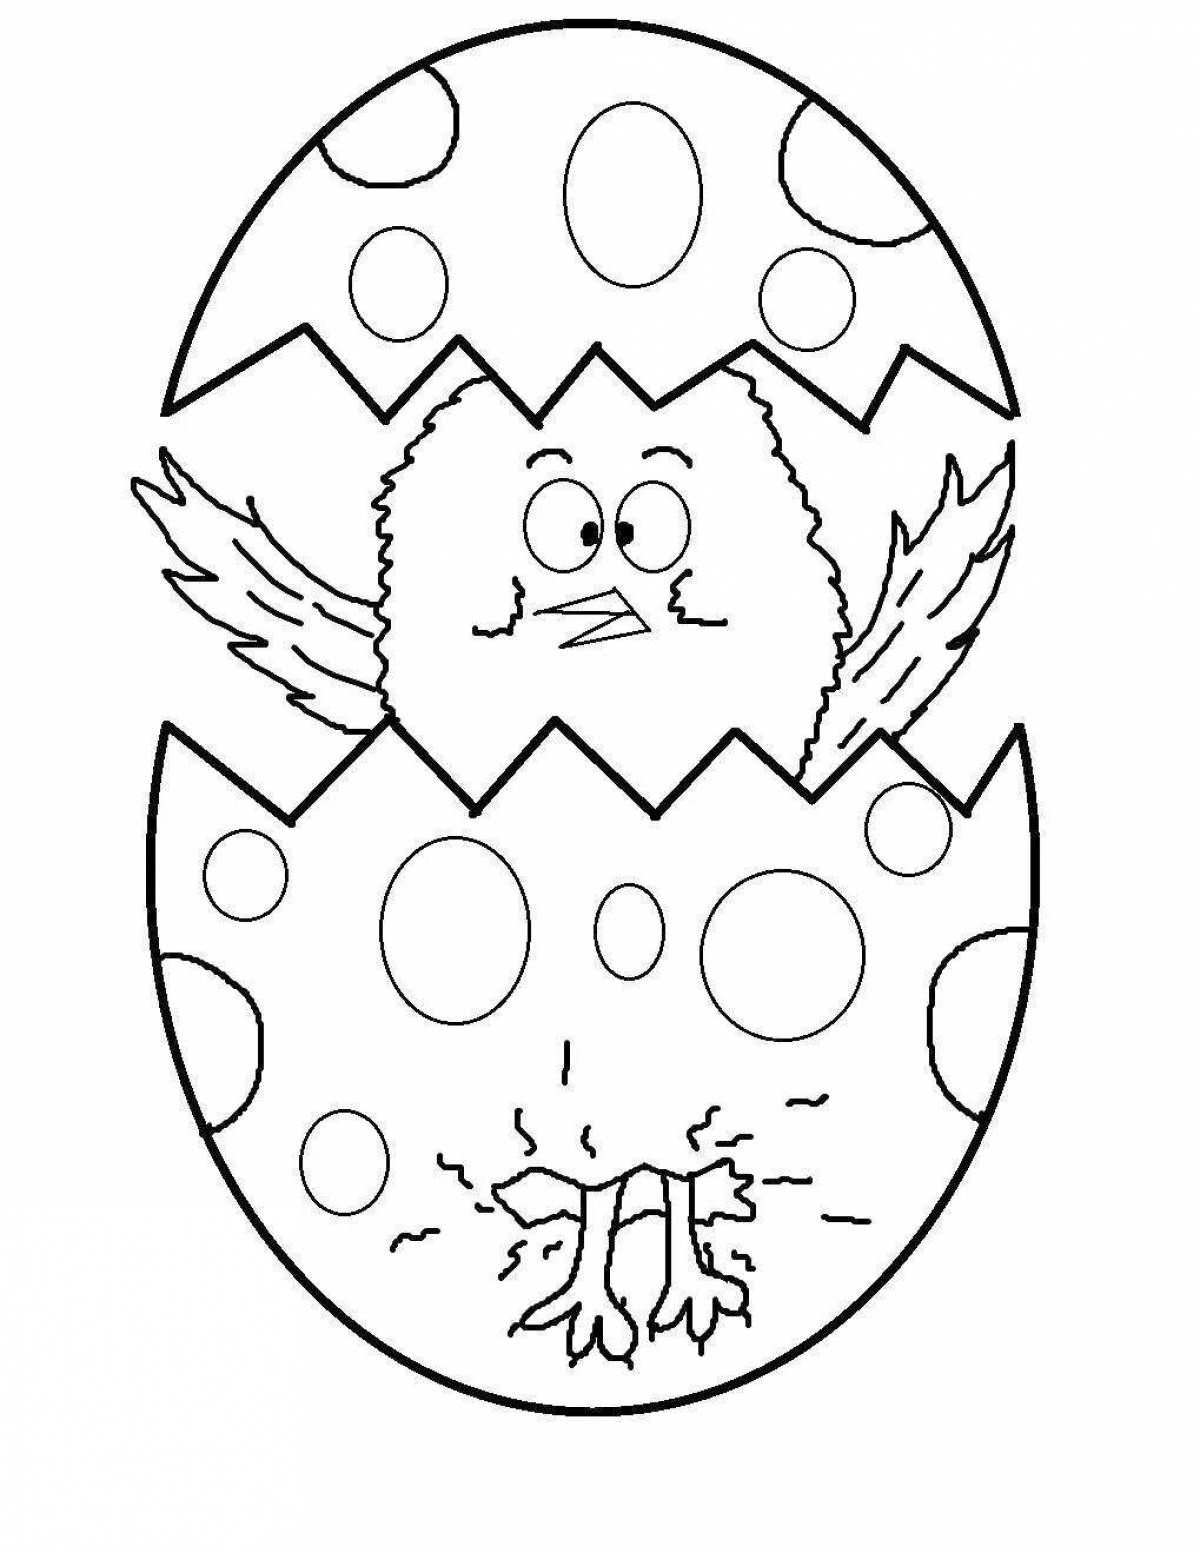 Animated chick in egg coloring page